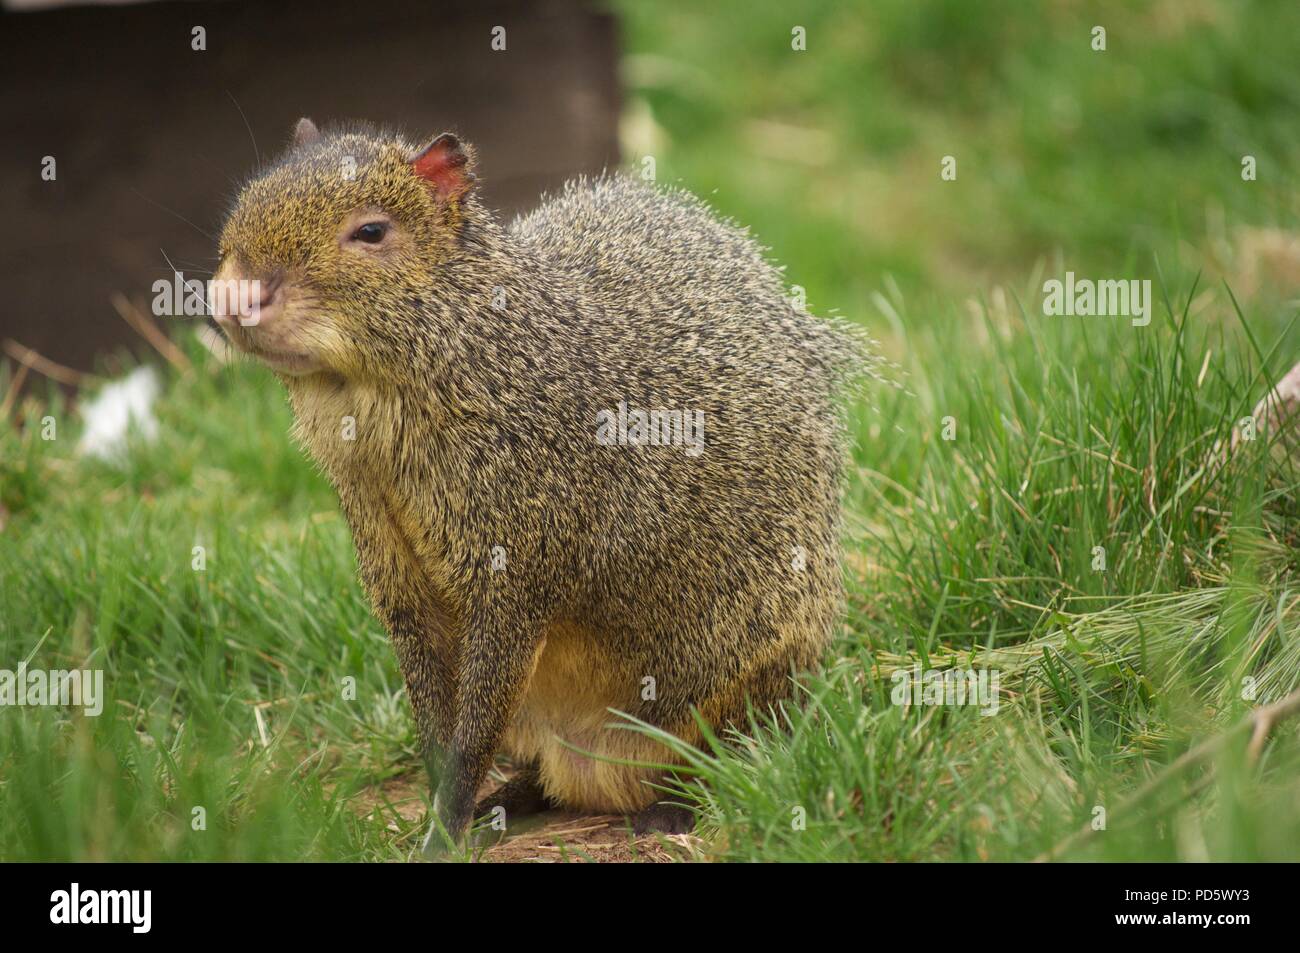 A Sereque sat down in the grass, also known as an Agouti (Dasyprocta) Stock Photo